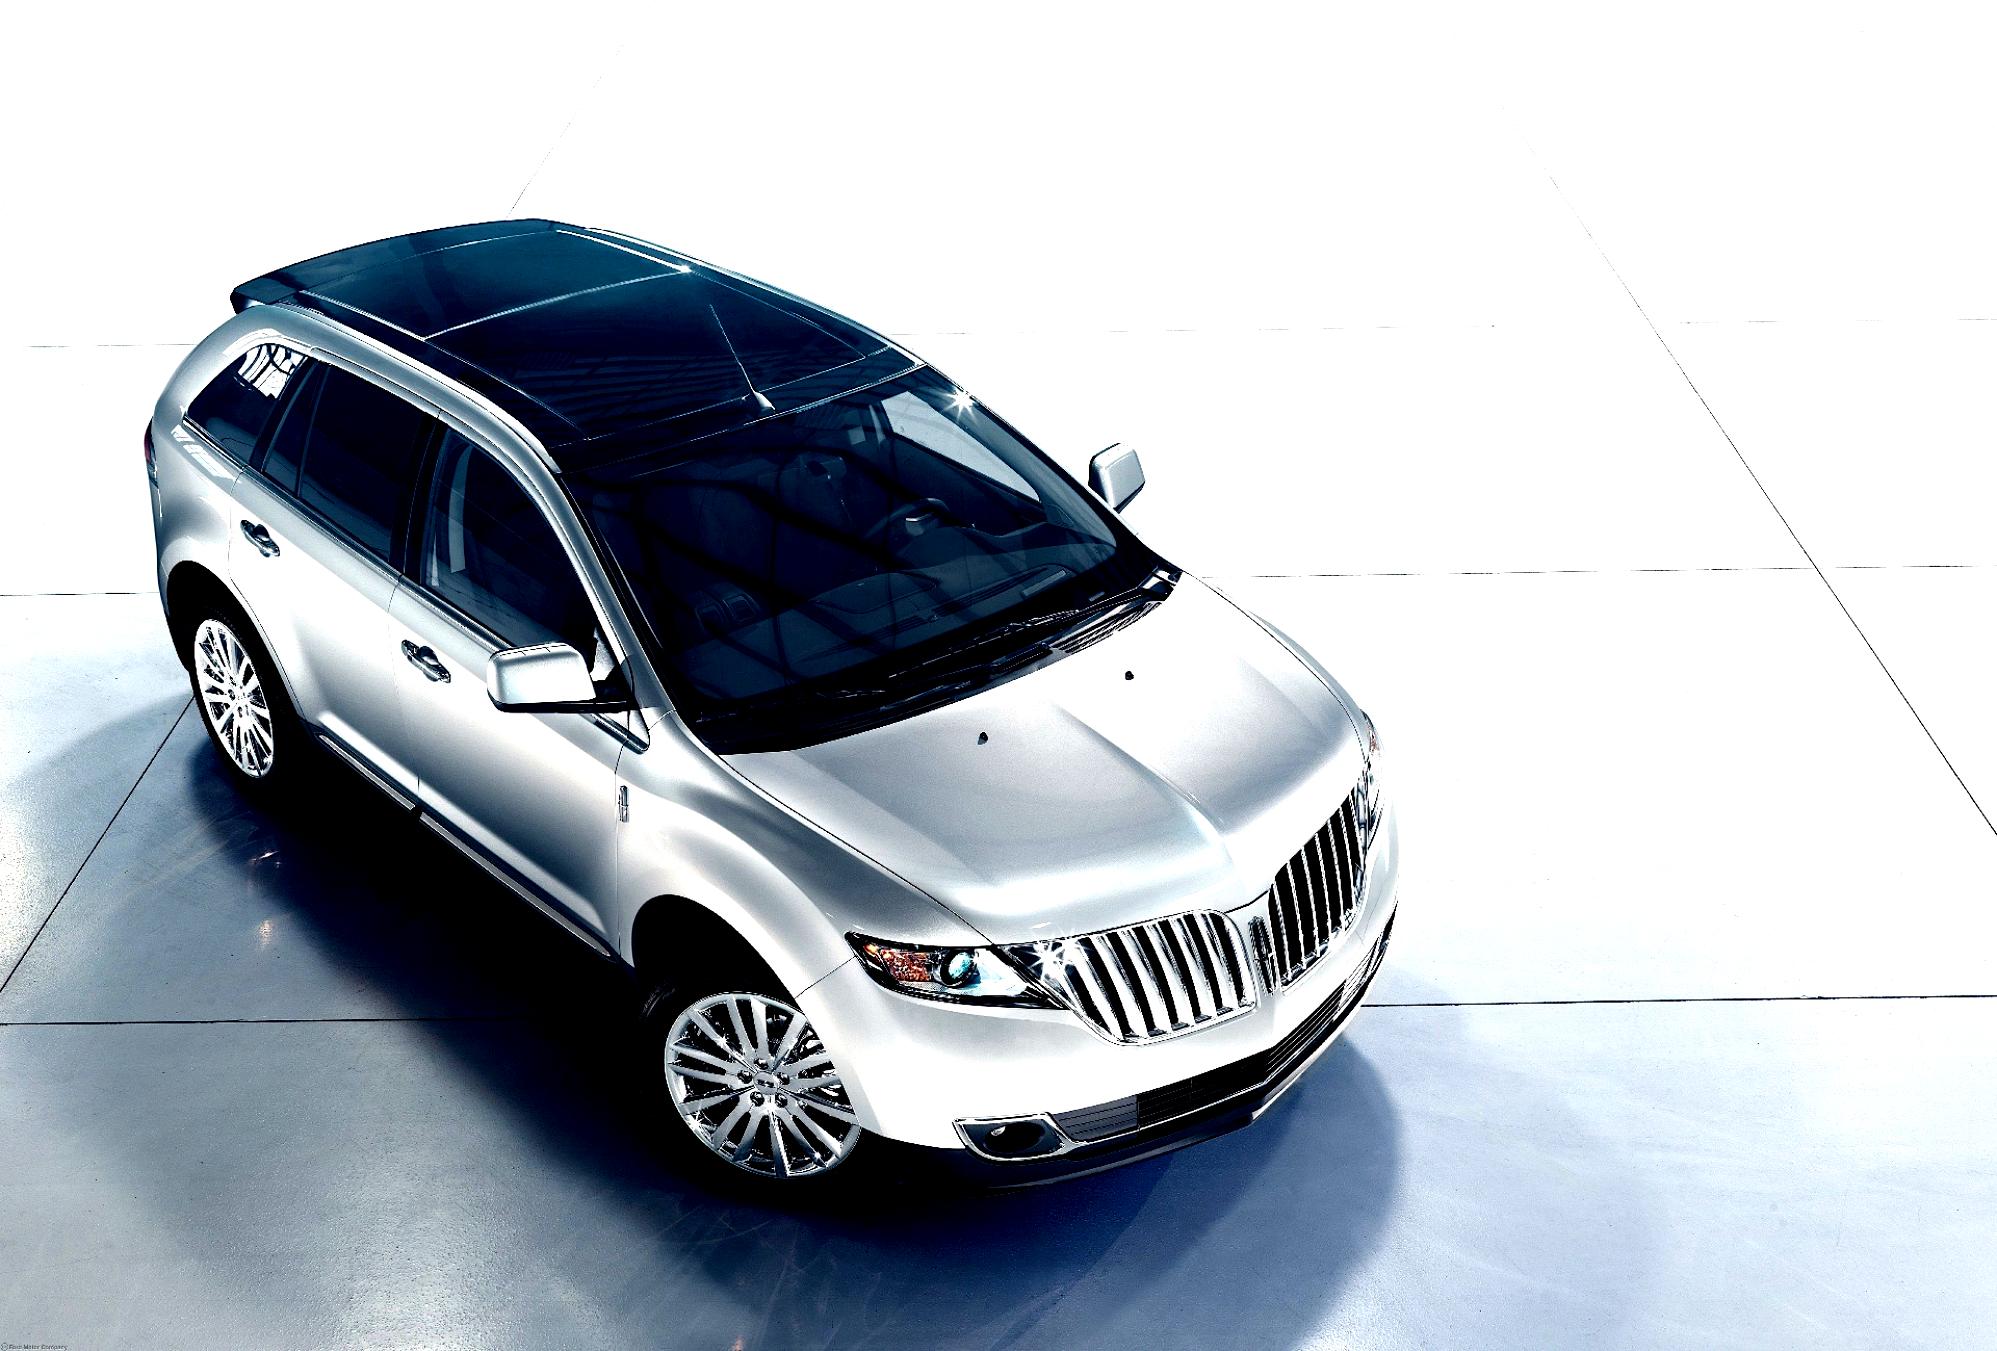 Lincoln MKX 2011 #25